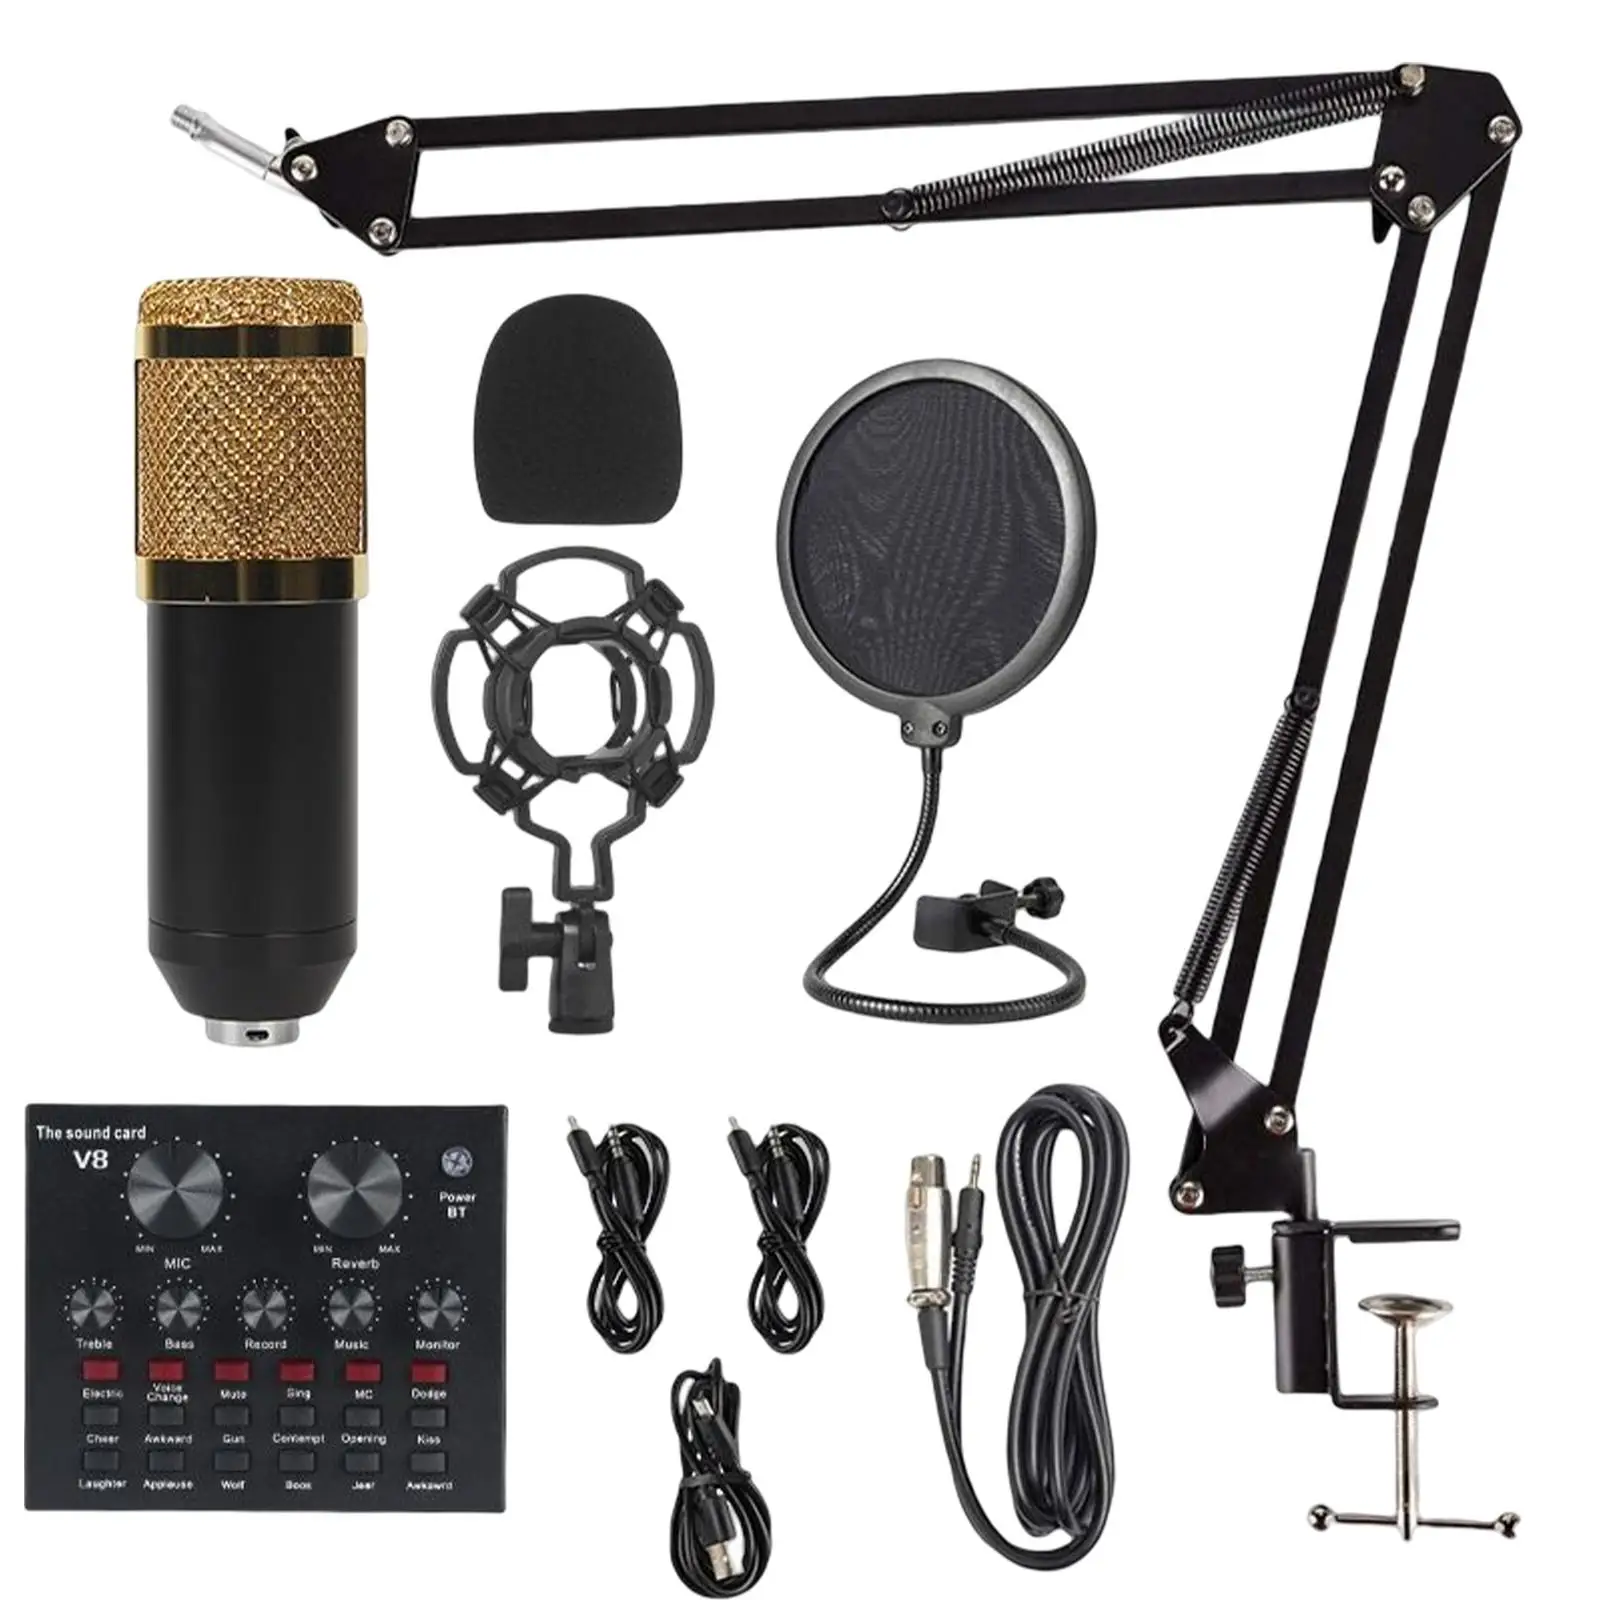 V8 Sound Card Recording Studio Equipment Audio Interface Mixer for Laptop Computer Broadcasting Chat On Live Sing Calling